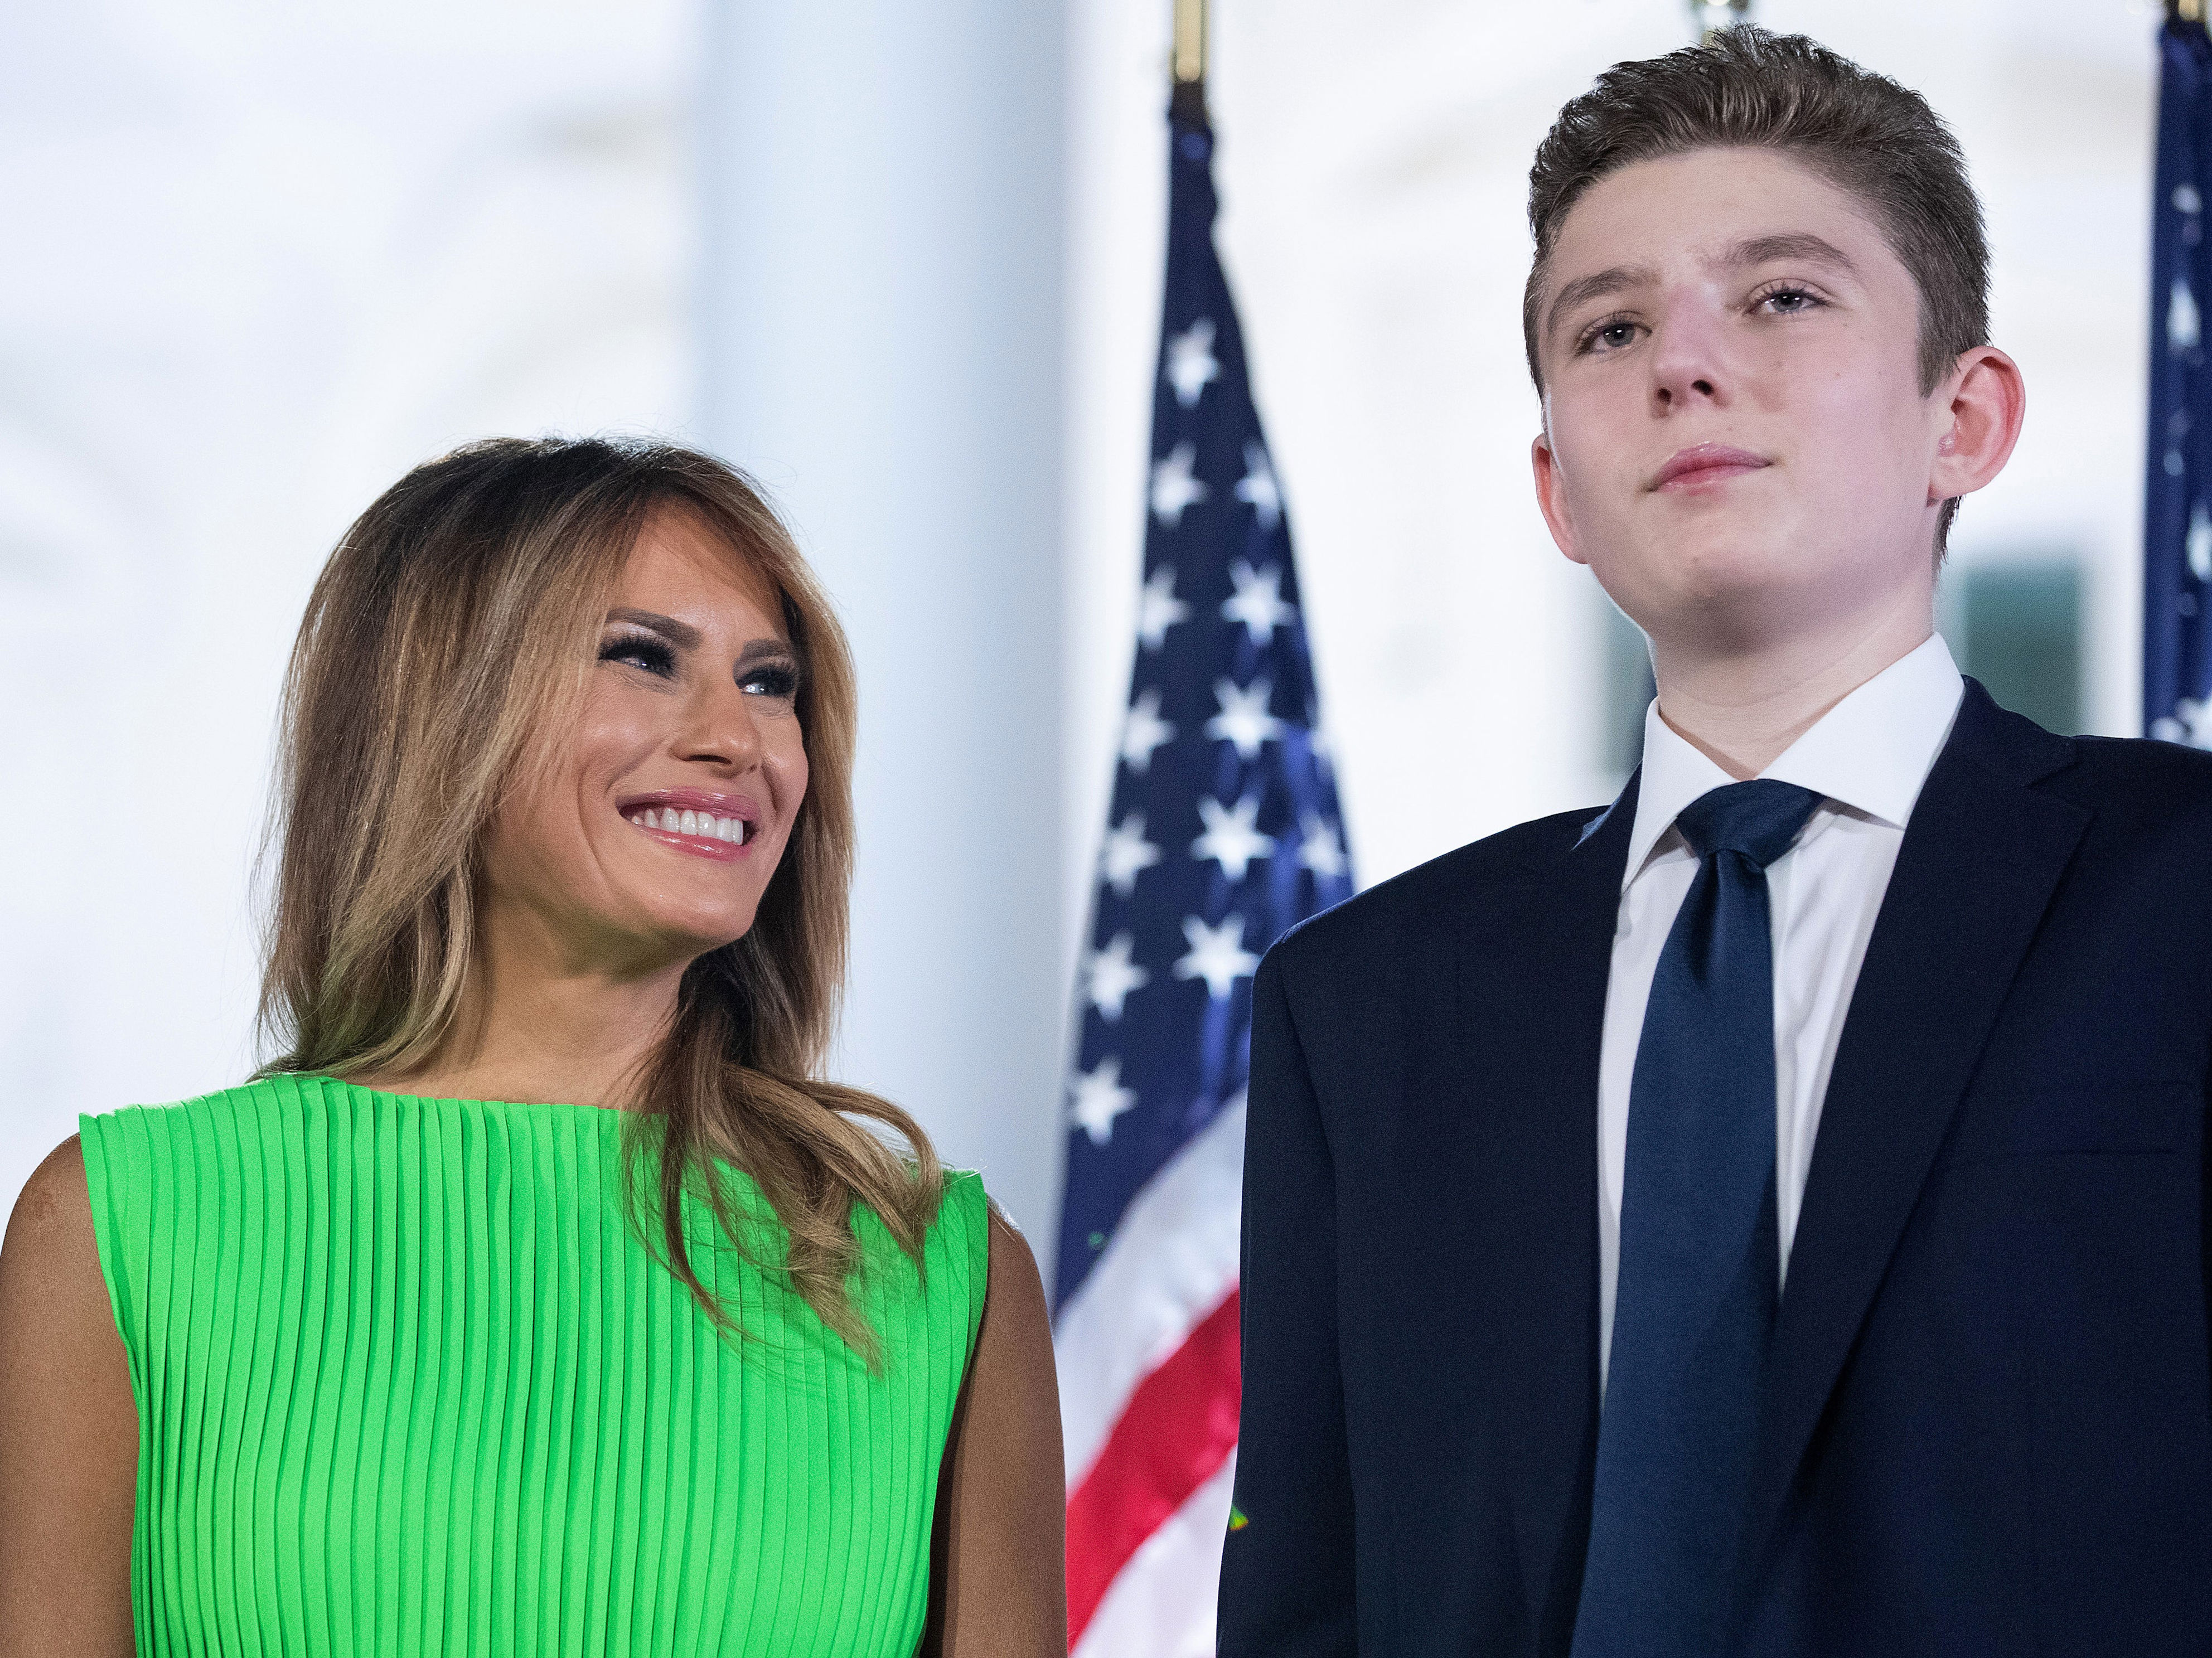 trump was given the day off trial for barron’s graduation. now he’s headlining a republican fundraiser